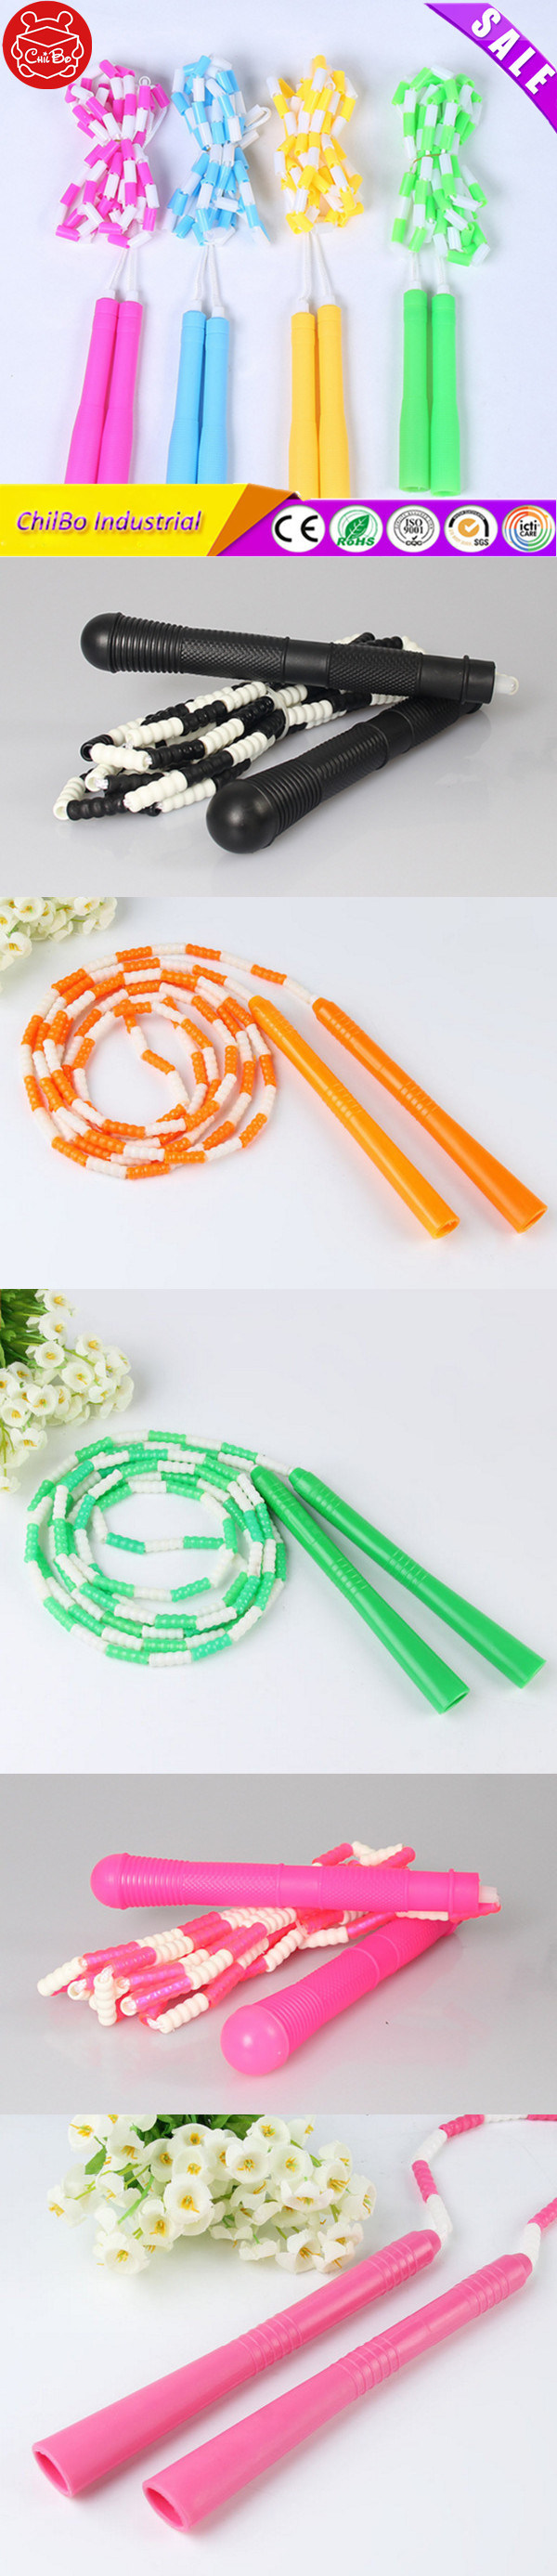 Sporting Beaded Jump Rope Education Toy for Kids